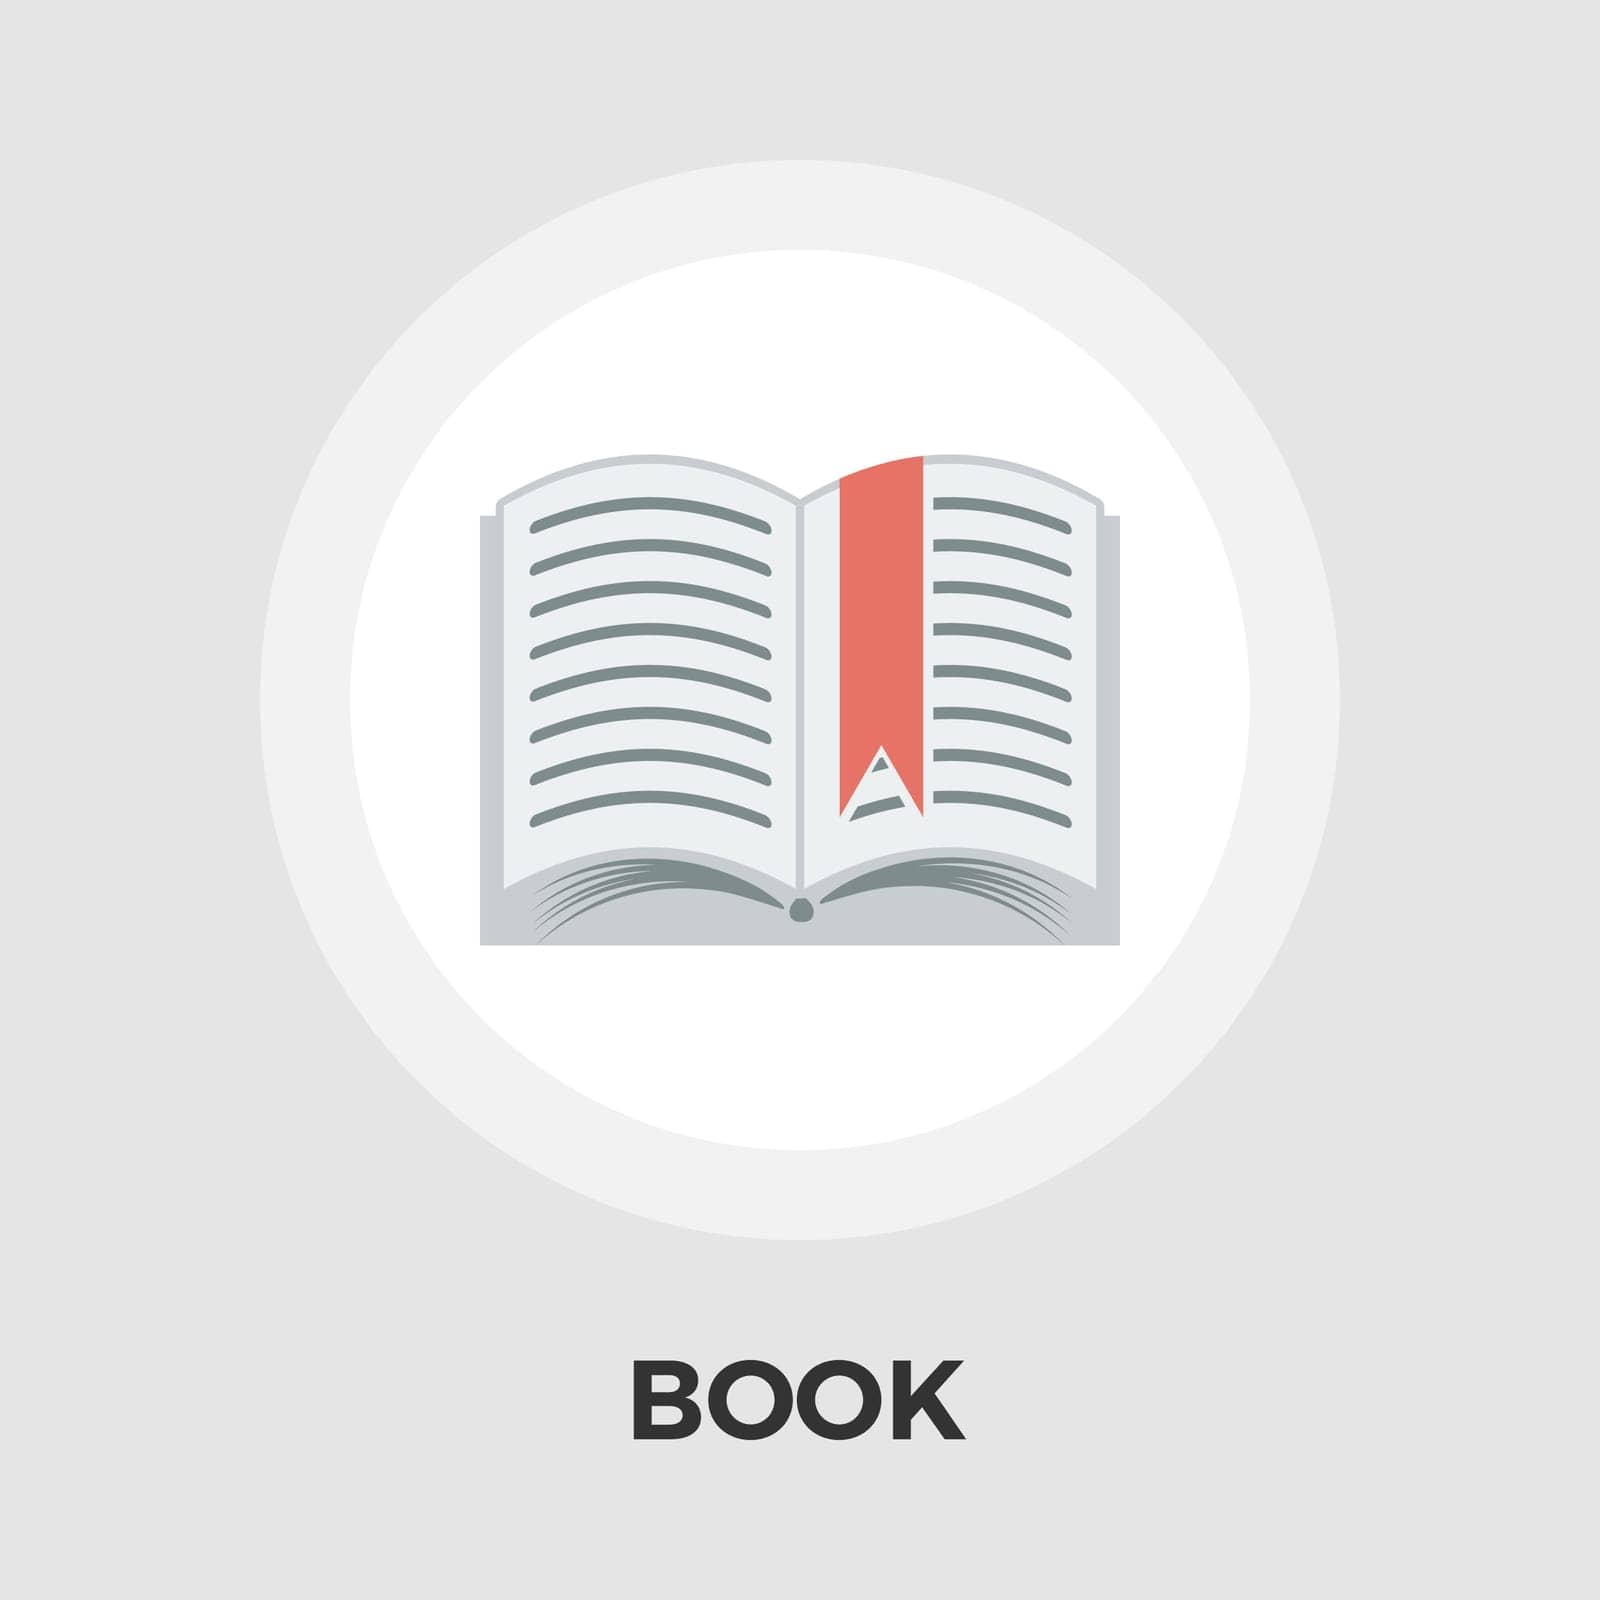 Book Icon Vector. Flat icon isolated on the white background. Editable EPS file. Vector illustration.